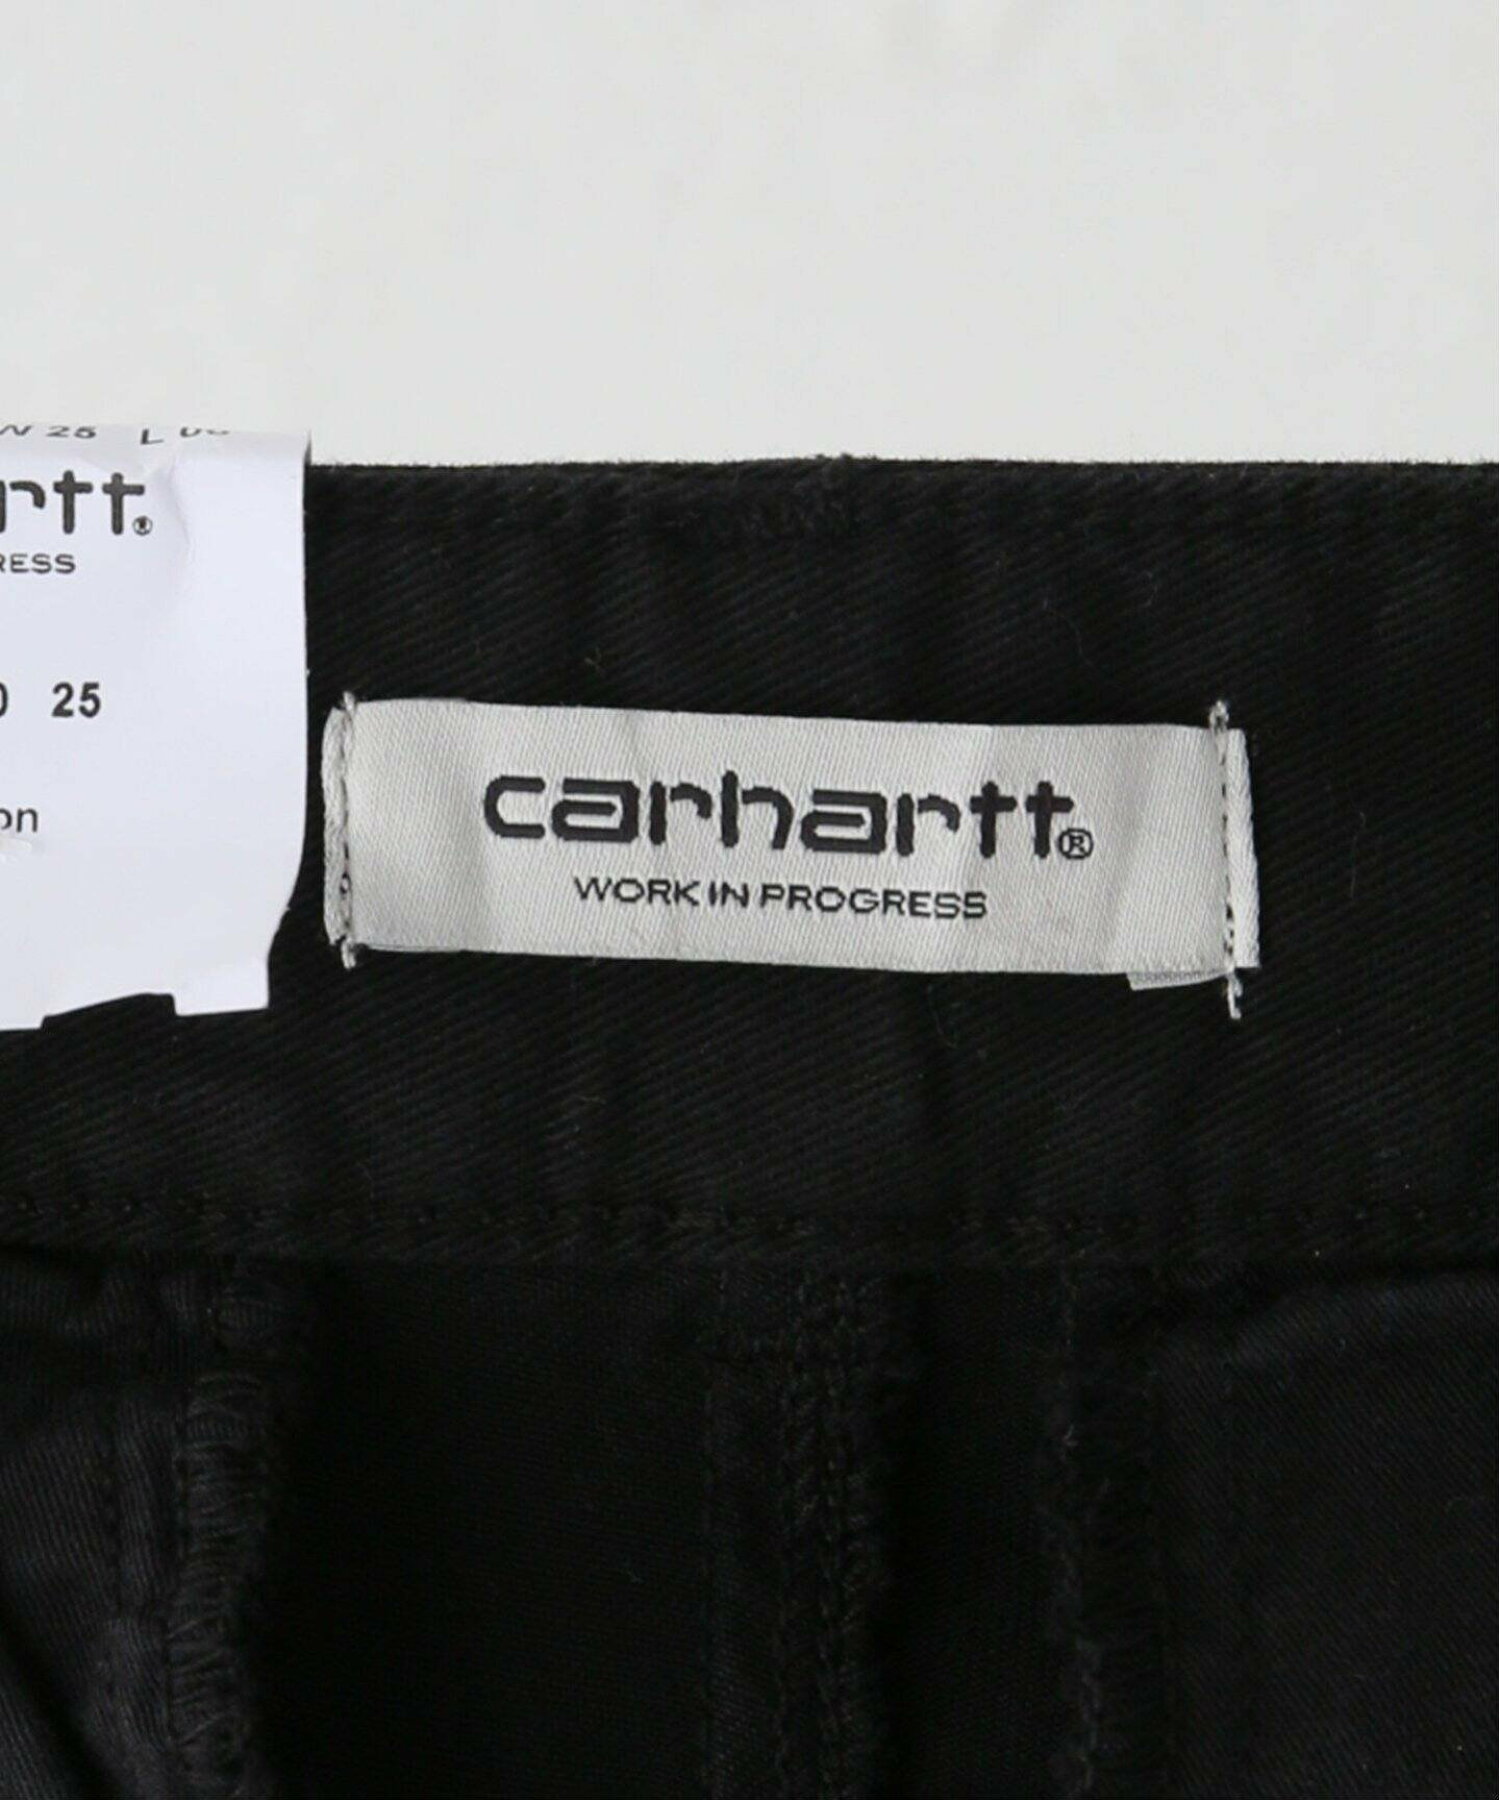 W COLLINS PANT │ Carhartt WIP